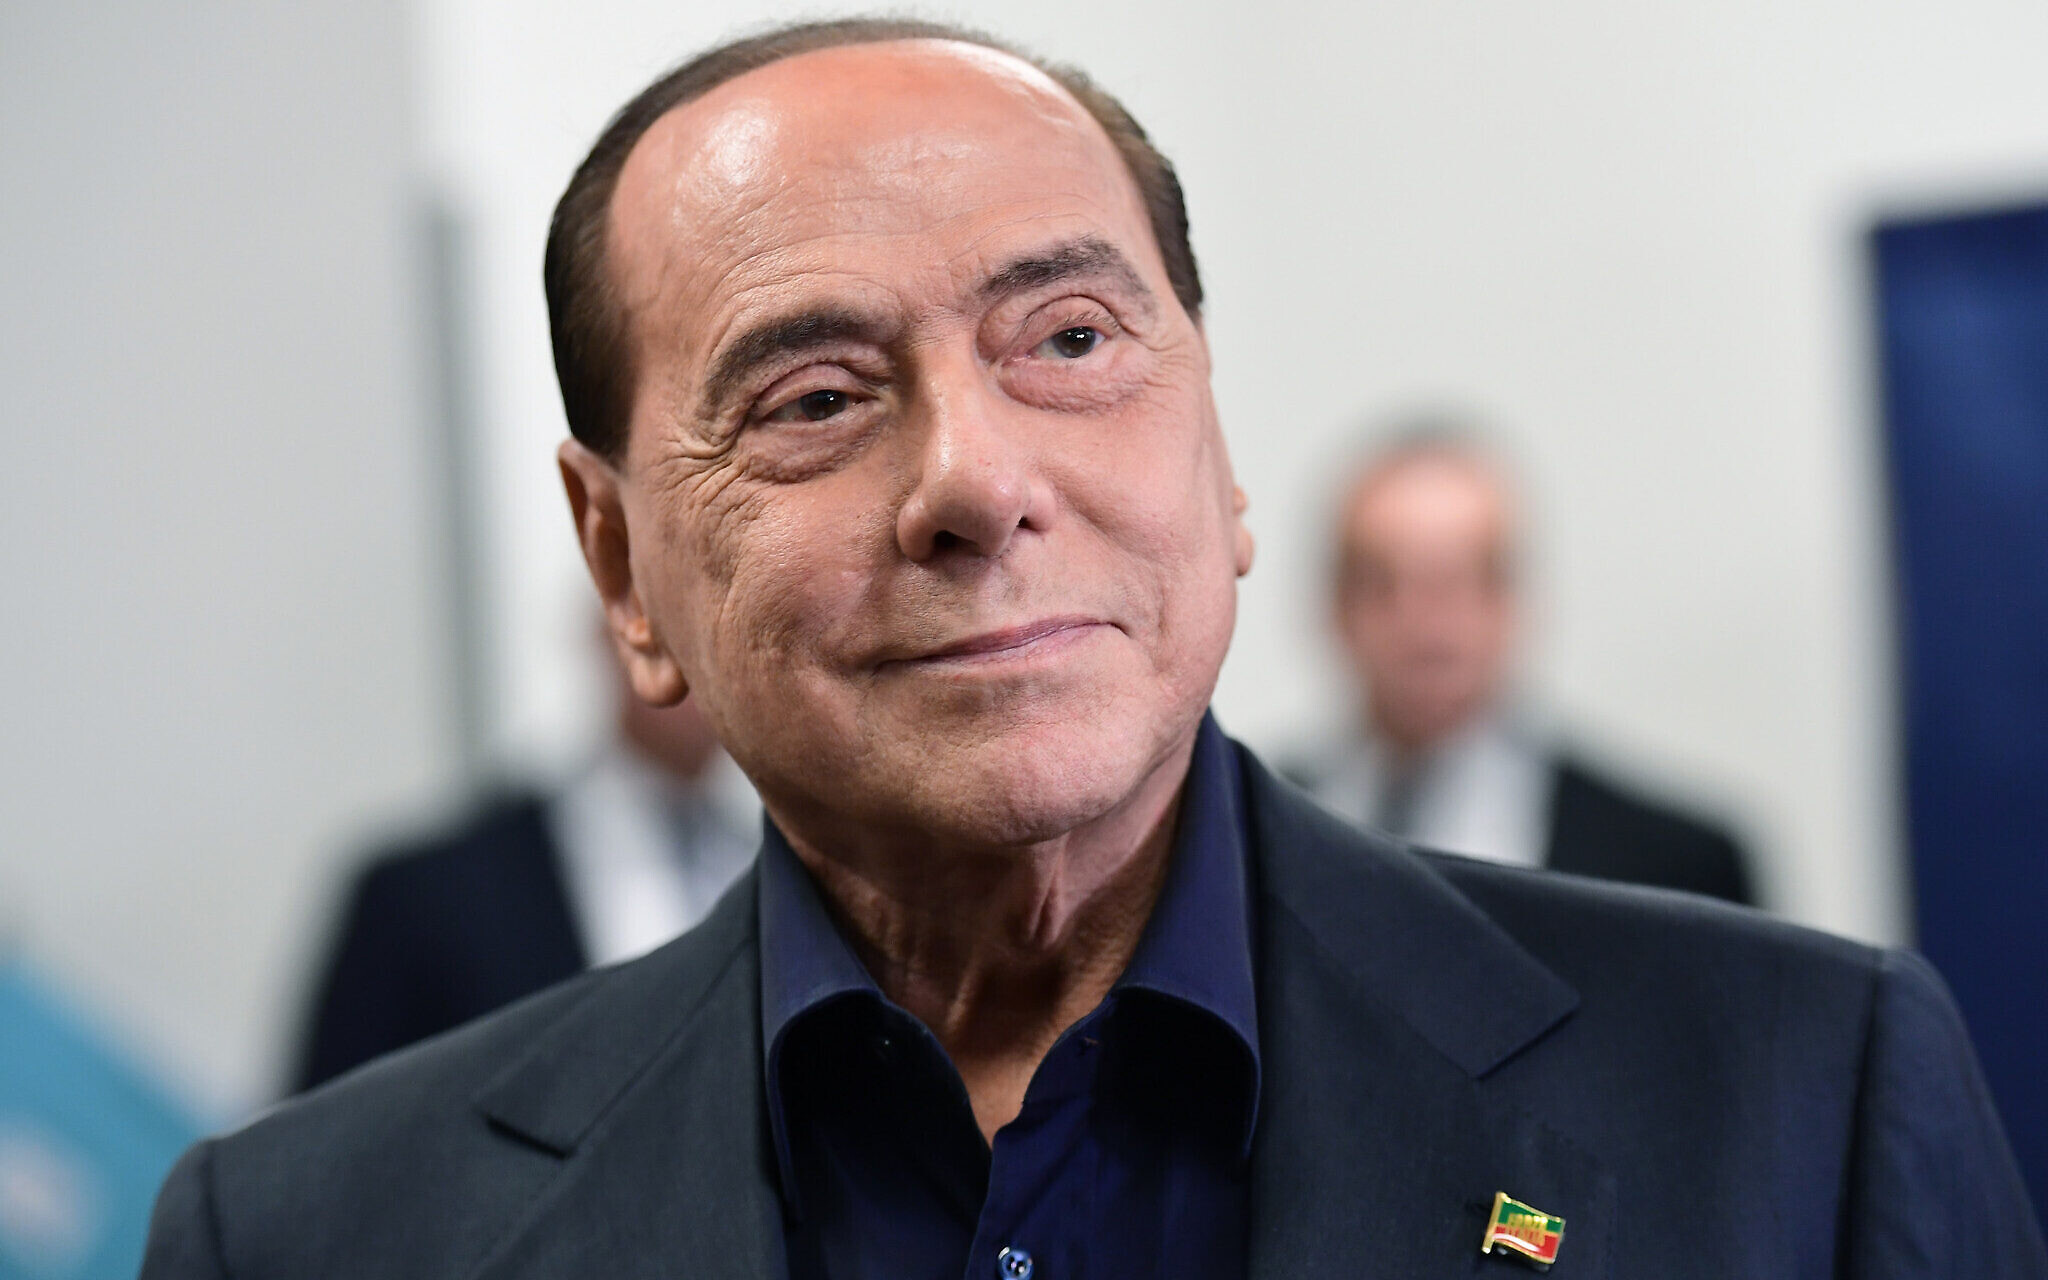 Italys ex-PM Silvio Berlusconi, known for his legal and sex scandals, dies at 86 The Times of Israel